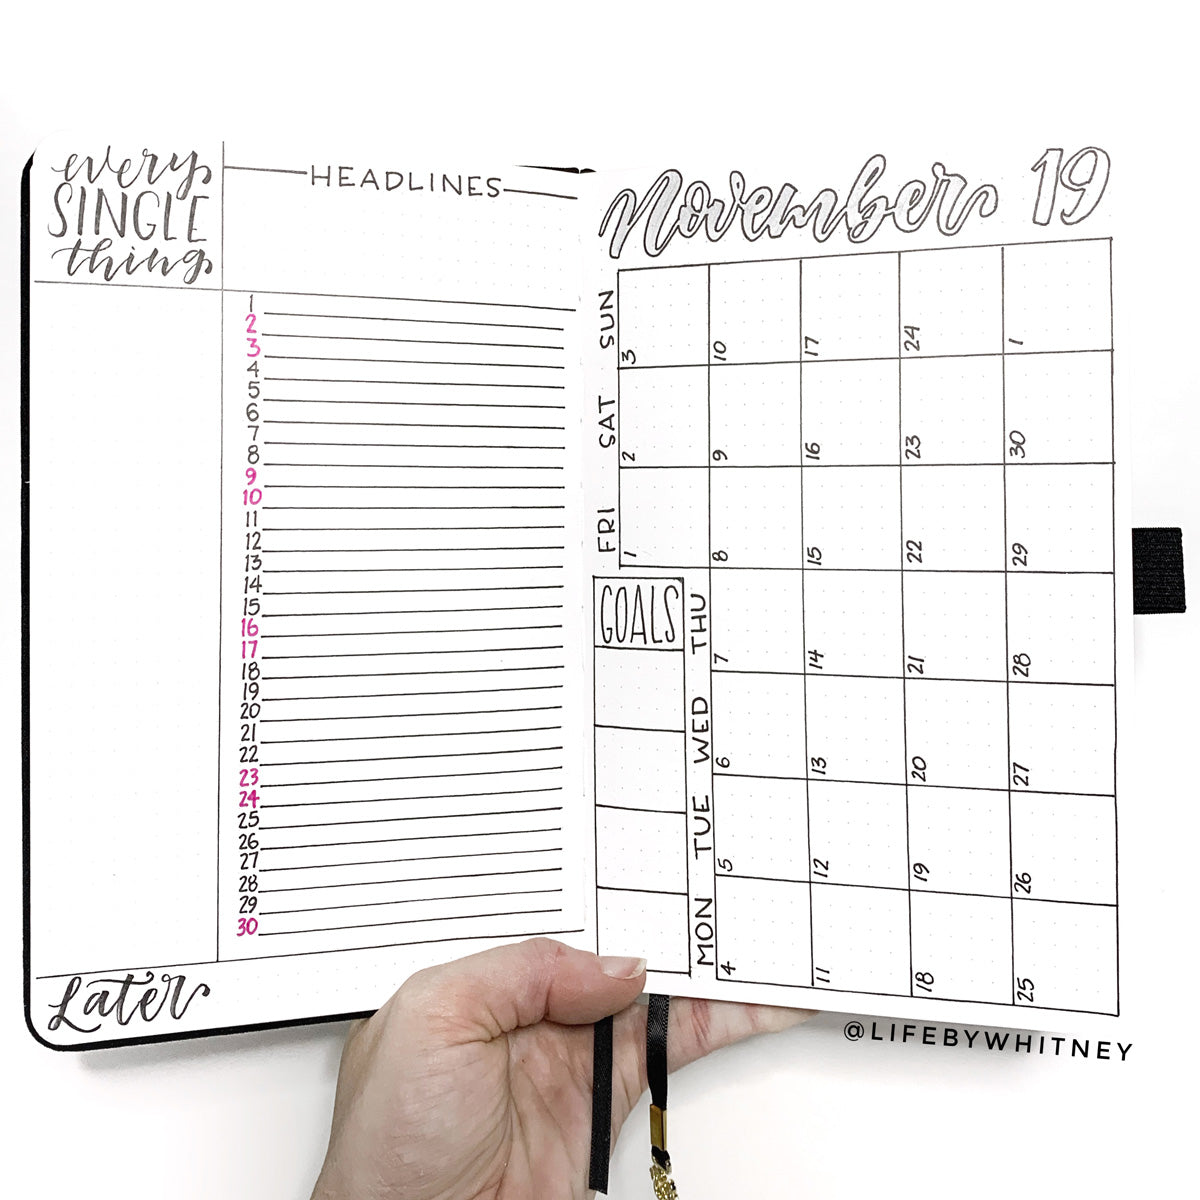 Calendar Icons Bullet Journaling Stencil Makes at a Glance Calendar Layouts  Fast and Easy. Get It Over Here. 